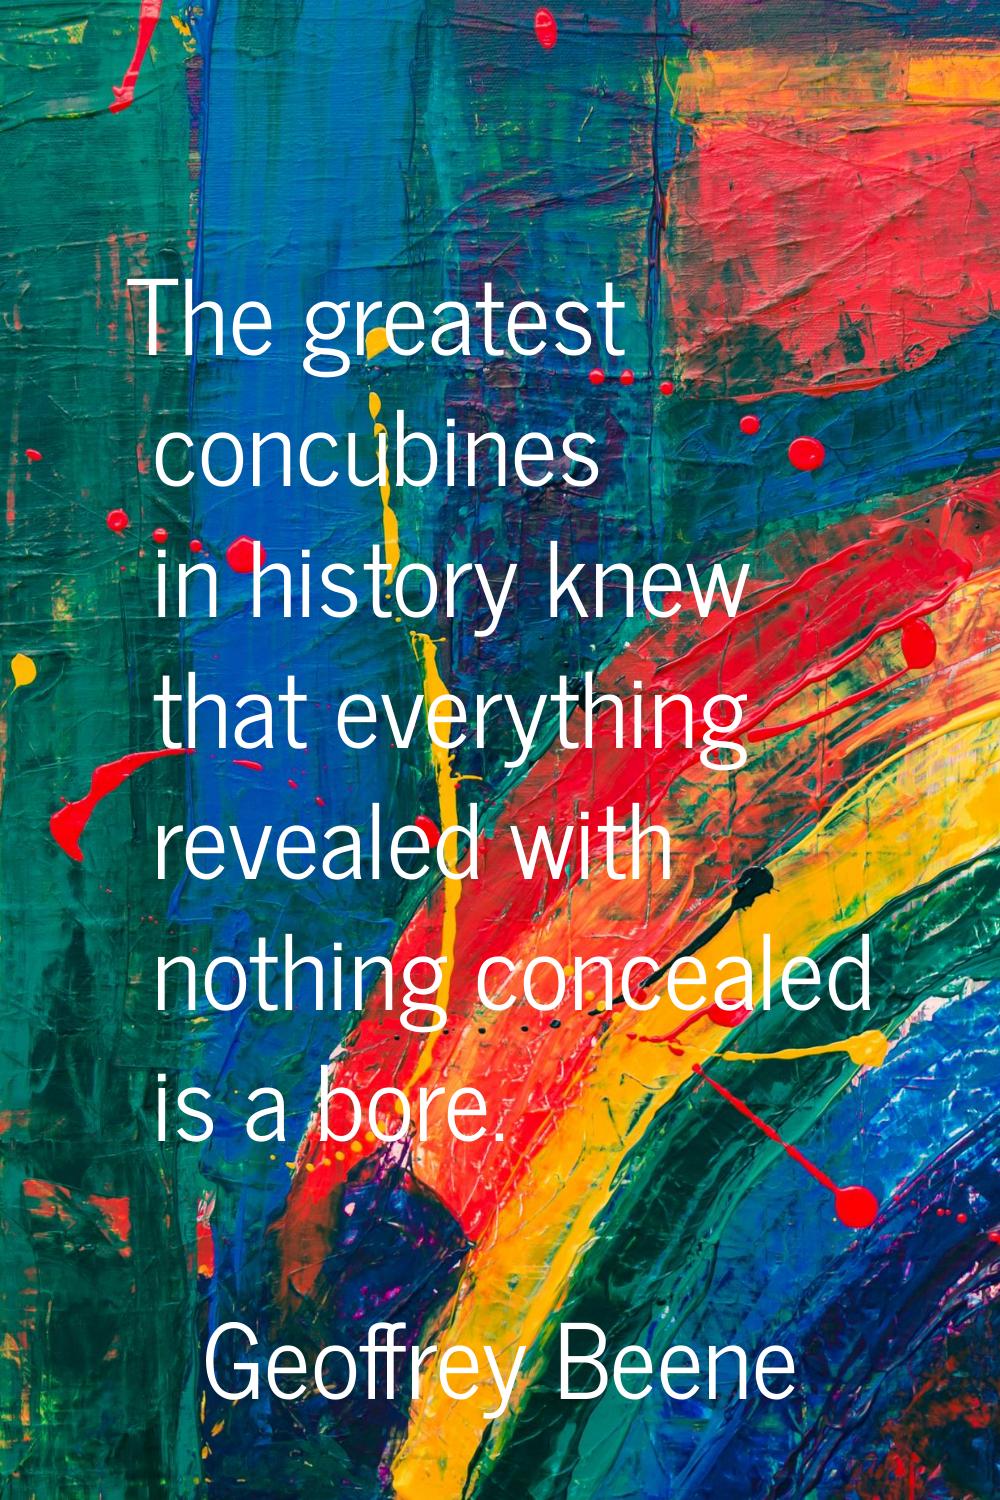 The greatest concubines in history knew that everything revealed with nothing concealed is a bore.